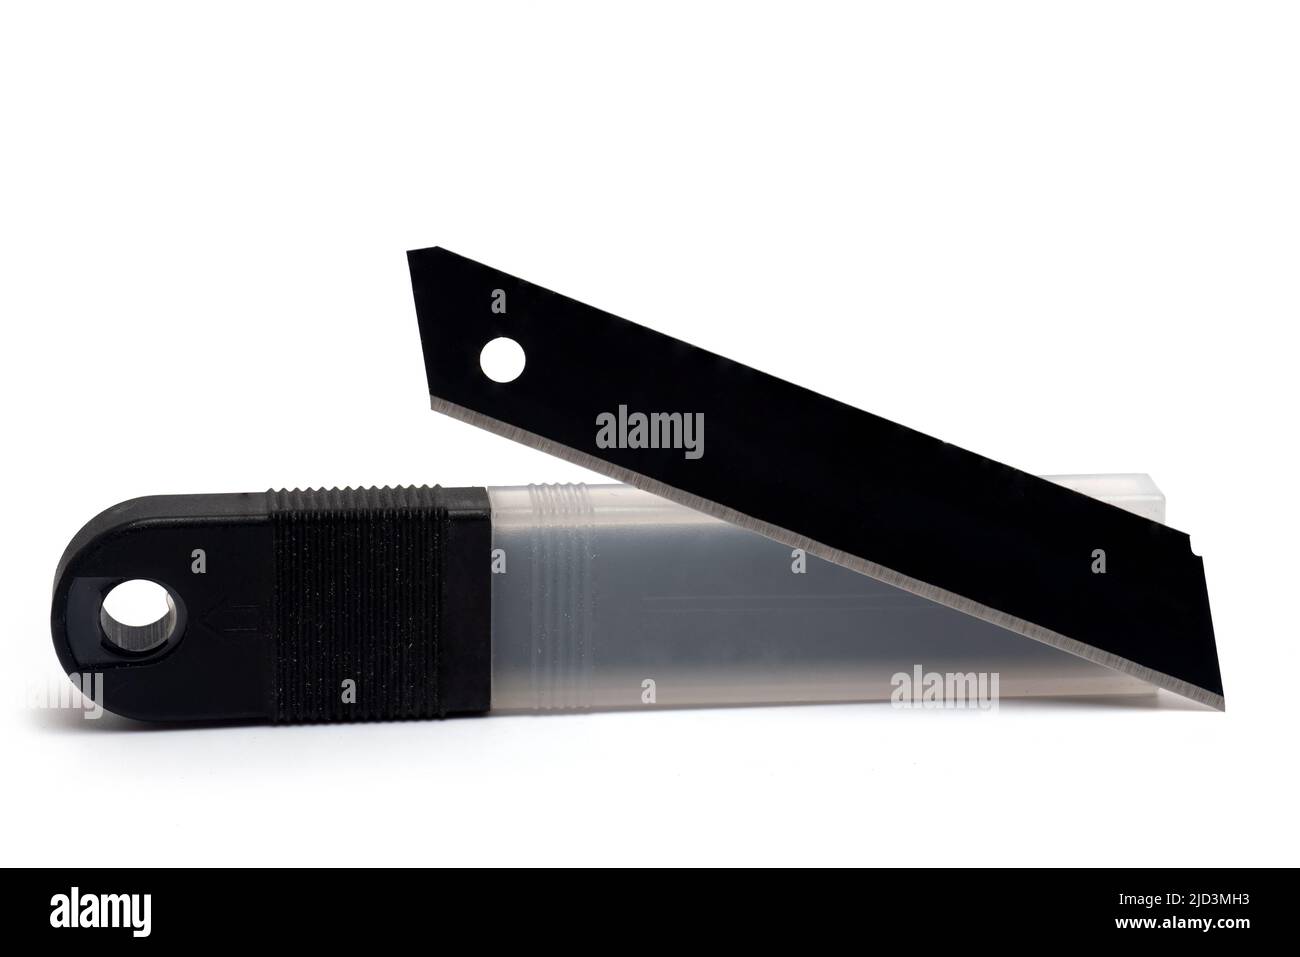 Close up of plastic package and dark sharp metal razor blade placed in front of it for use in knives with interchangeable snap off blades on white bac Stock Photo